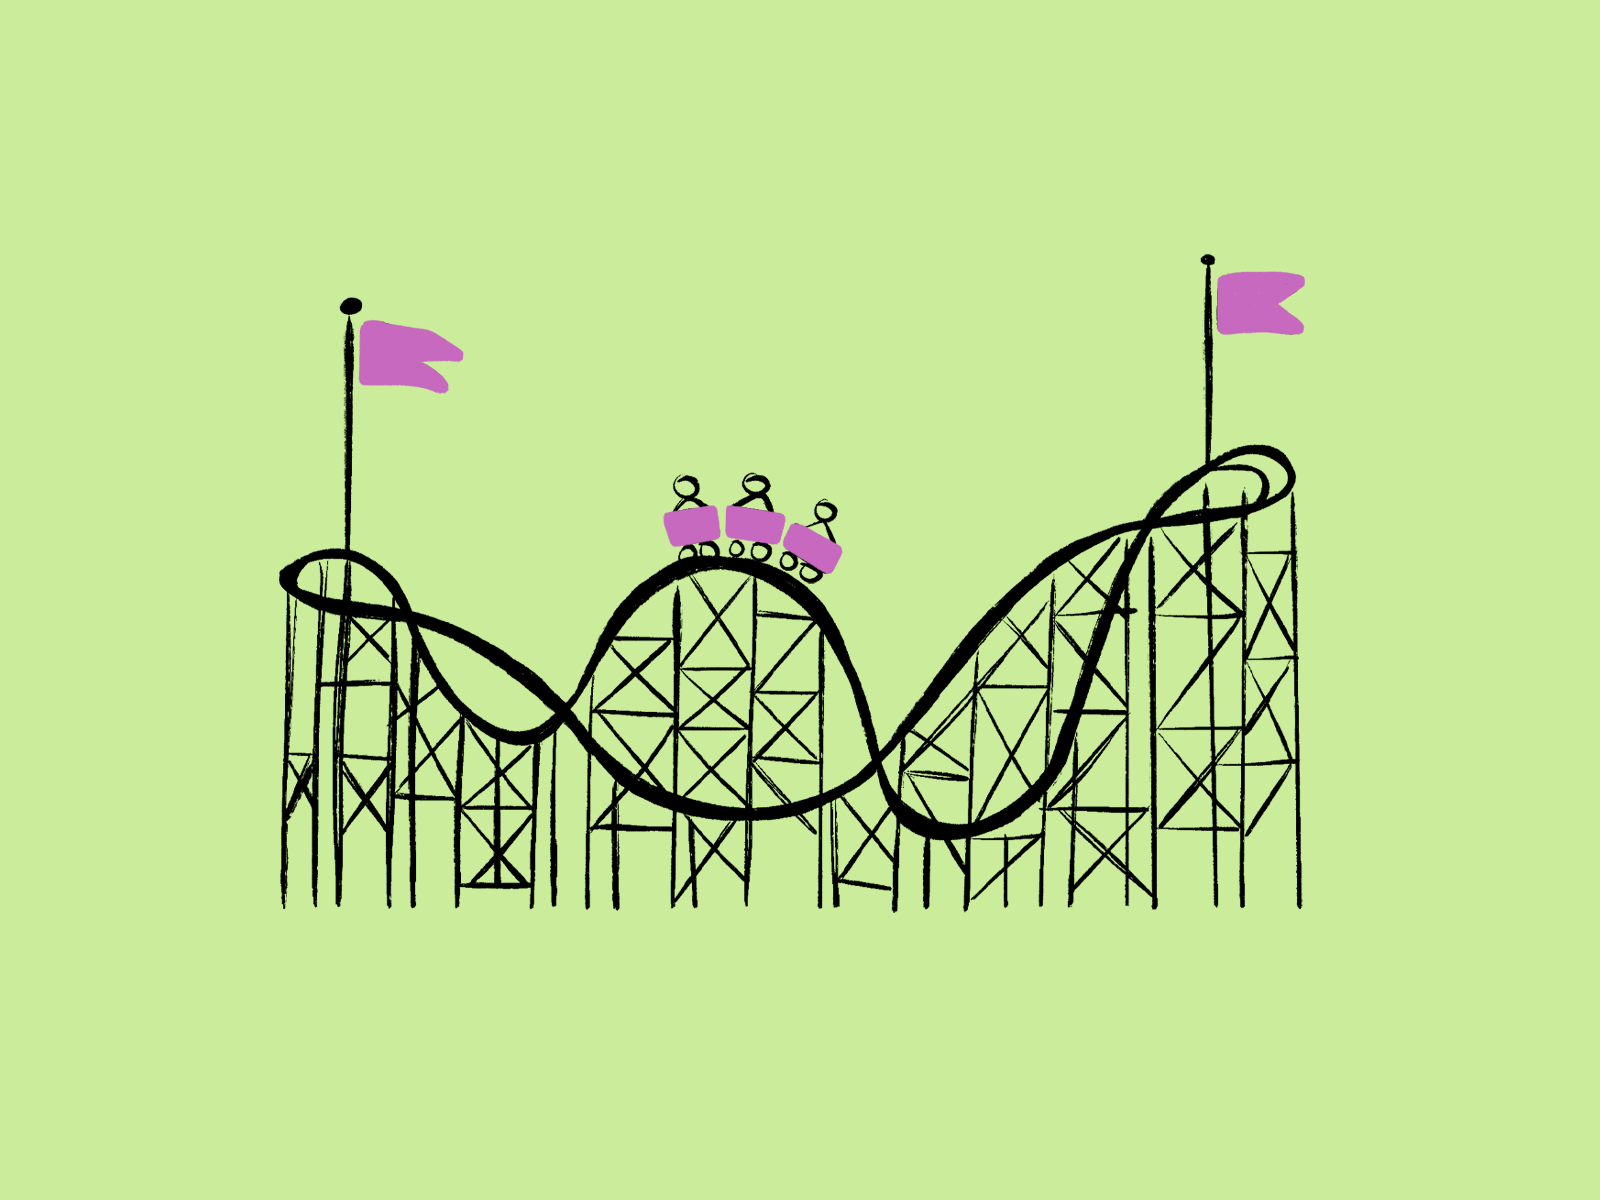 Roller Coaster animation carnival feria festival frame by frame frame to frame gif illustration life loop roller coaster rollercoaster speed ups and downs